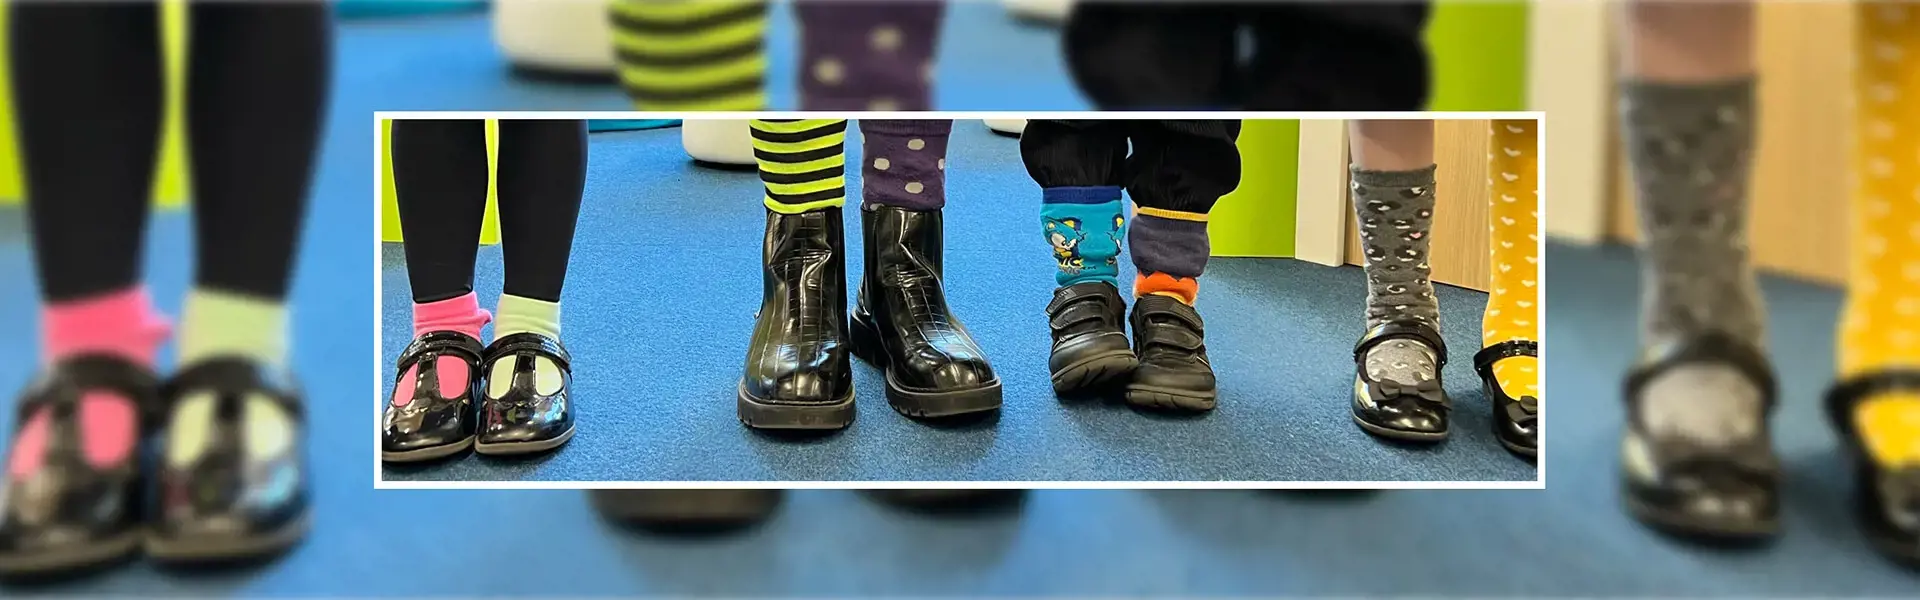 Odd Sock Day 2023 at Ibstock Place School, an independent school in Roehampton